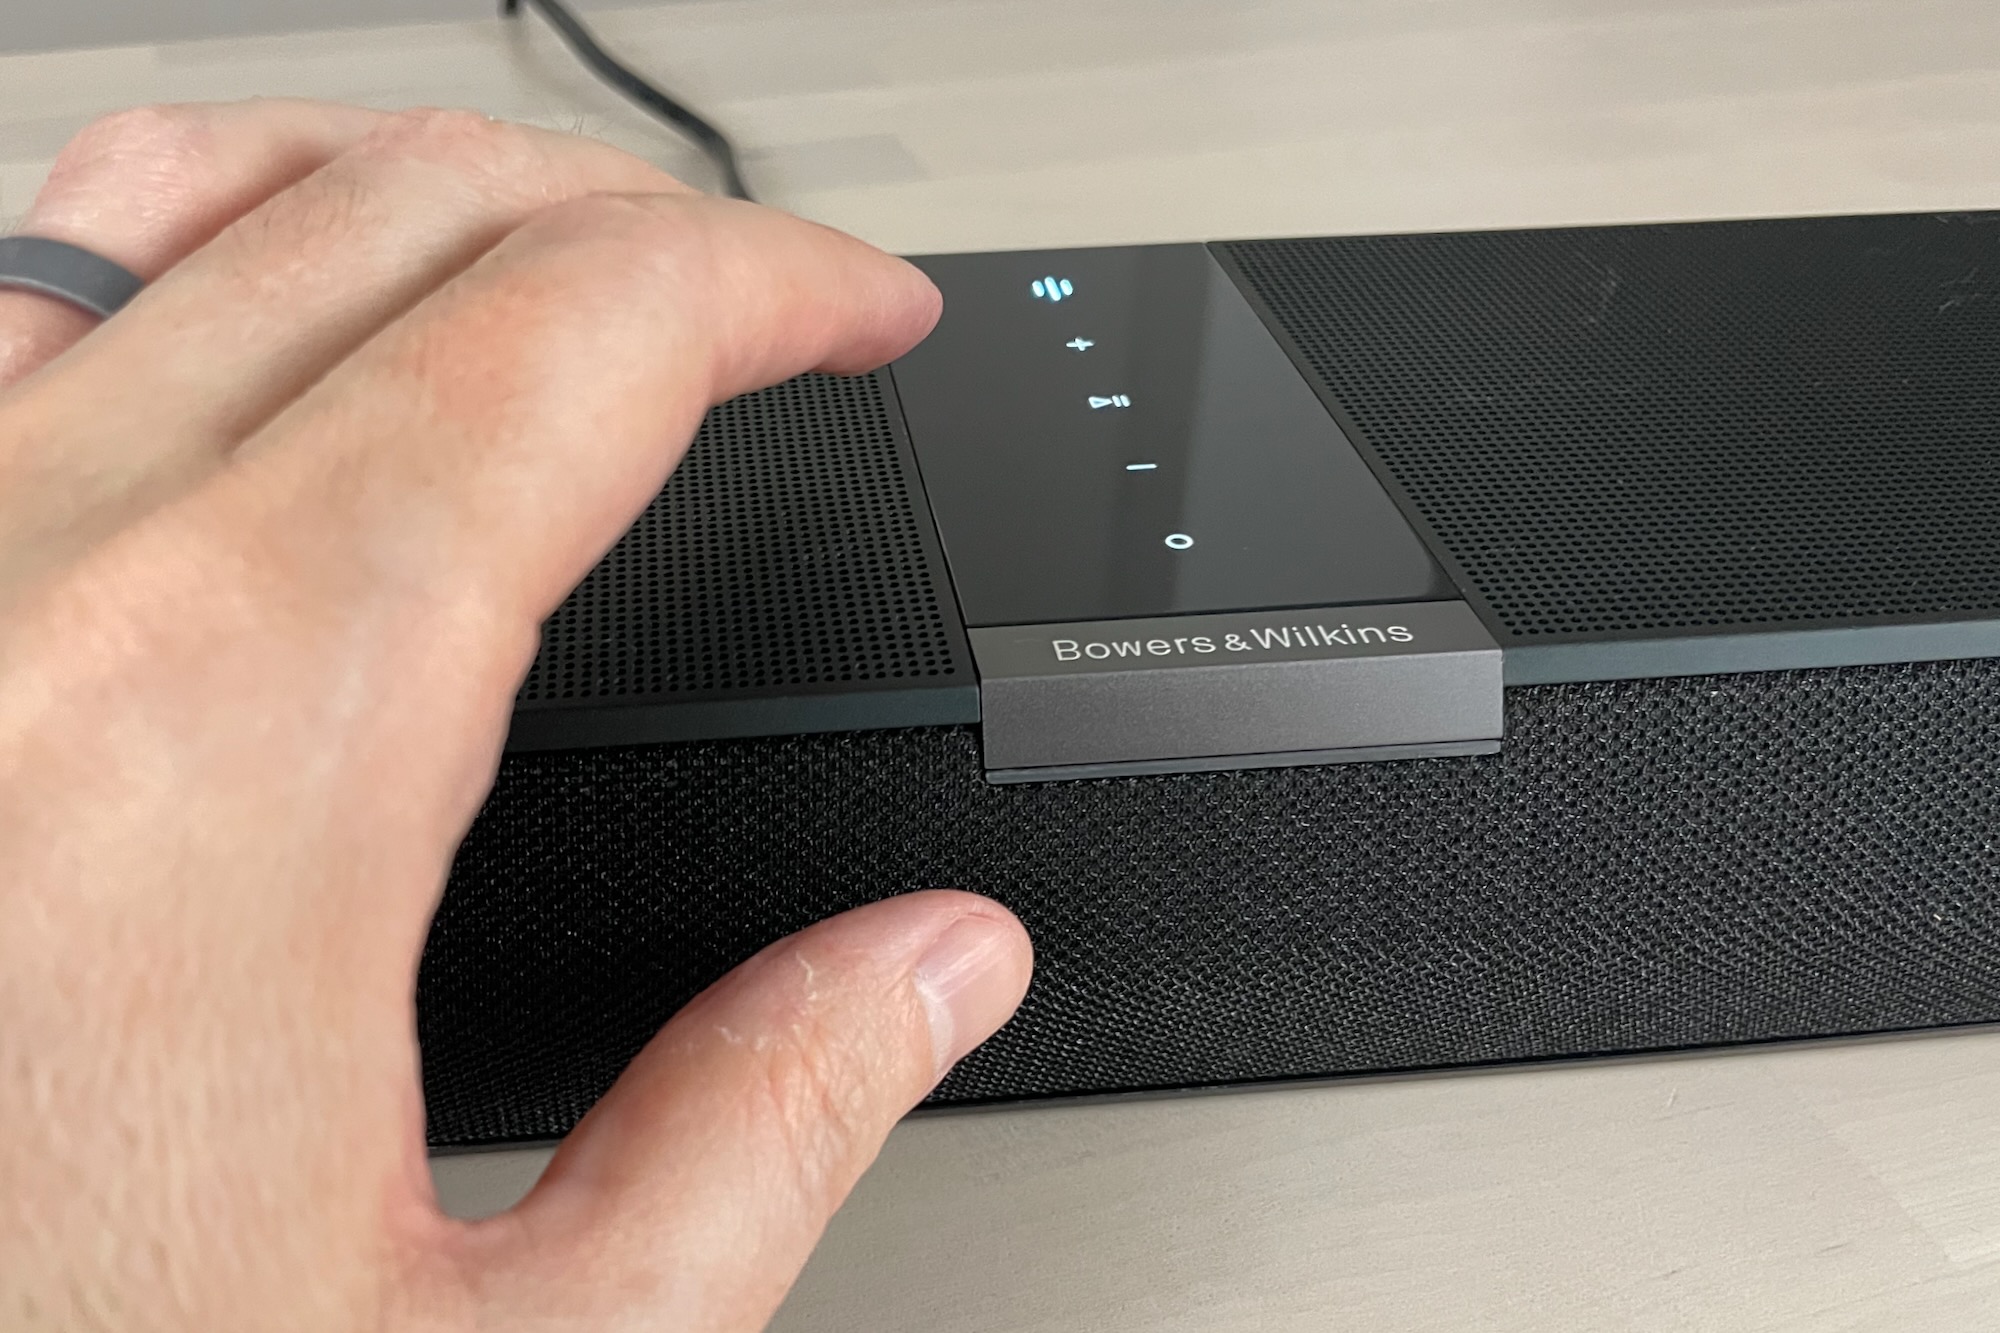 Bowers & Wilkins Panorama3 パノラマ3 スピーカー - オーディオ機器